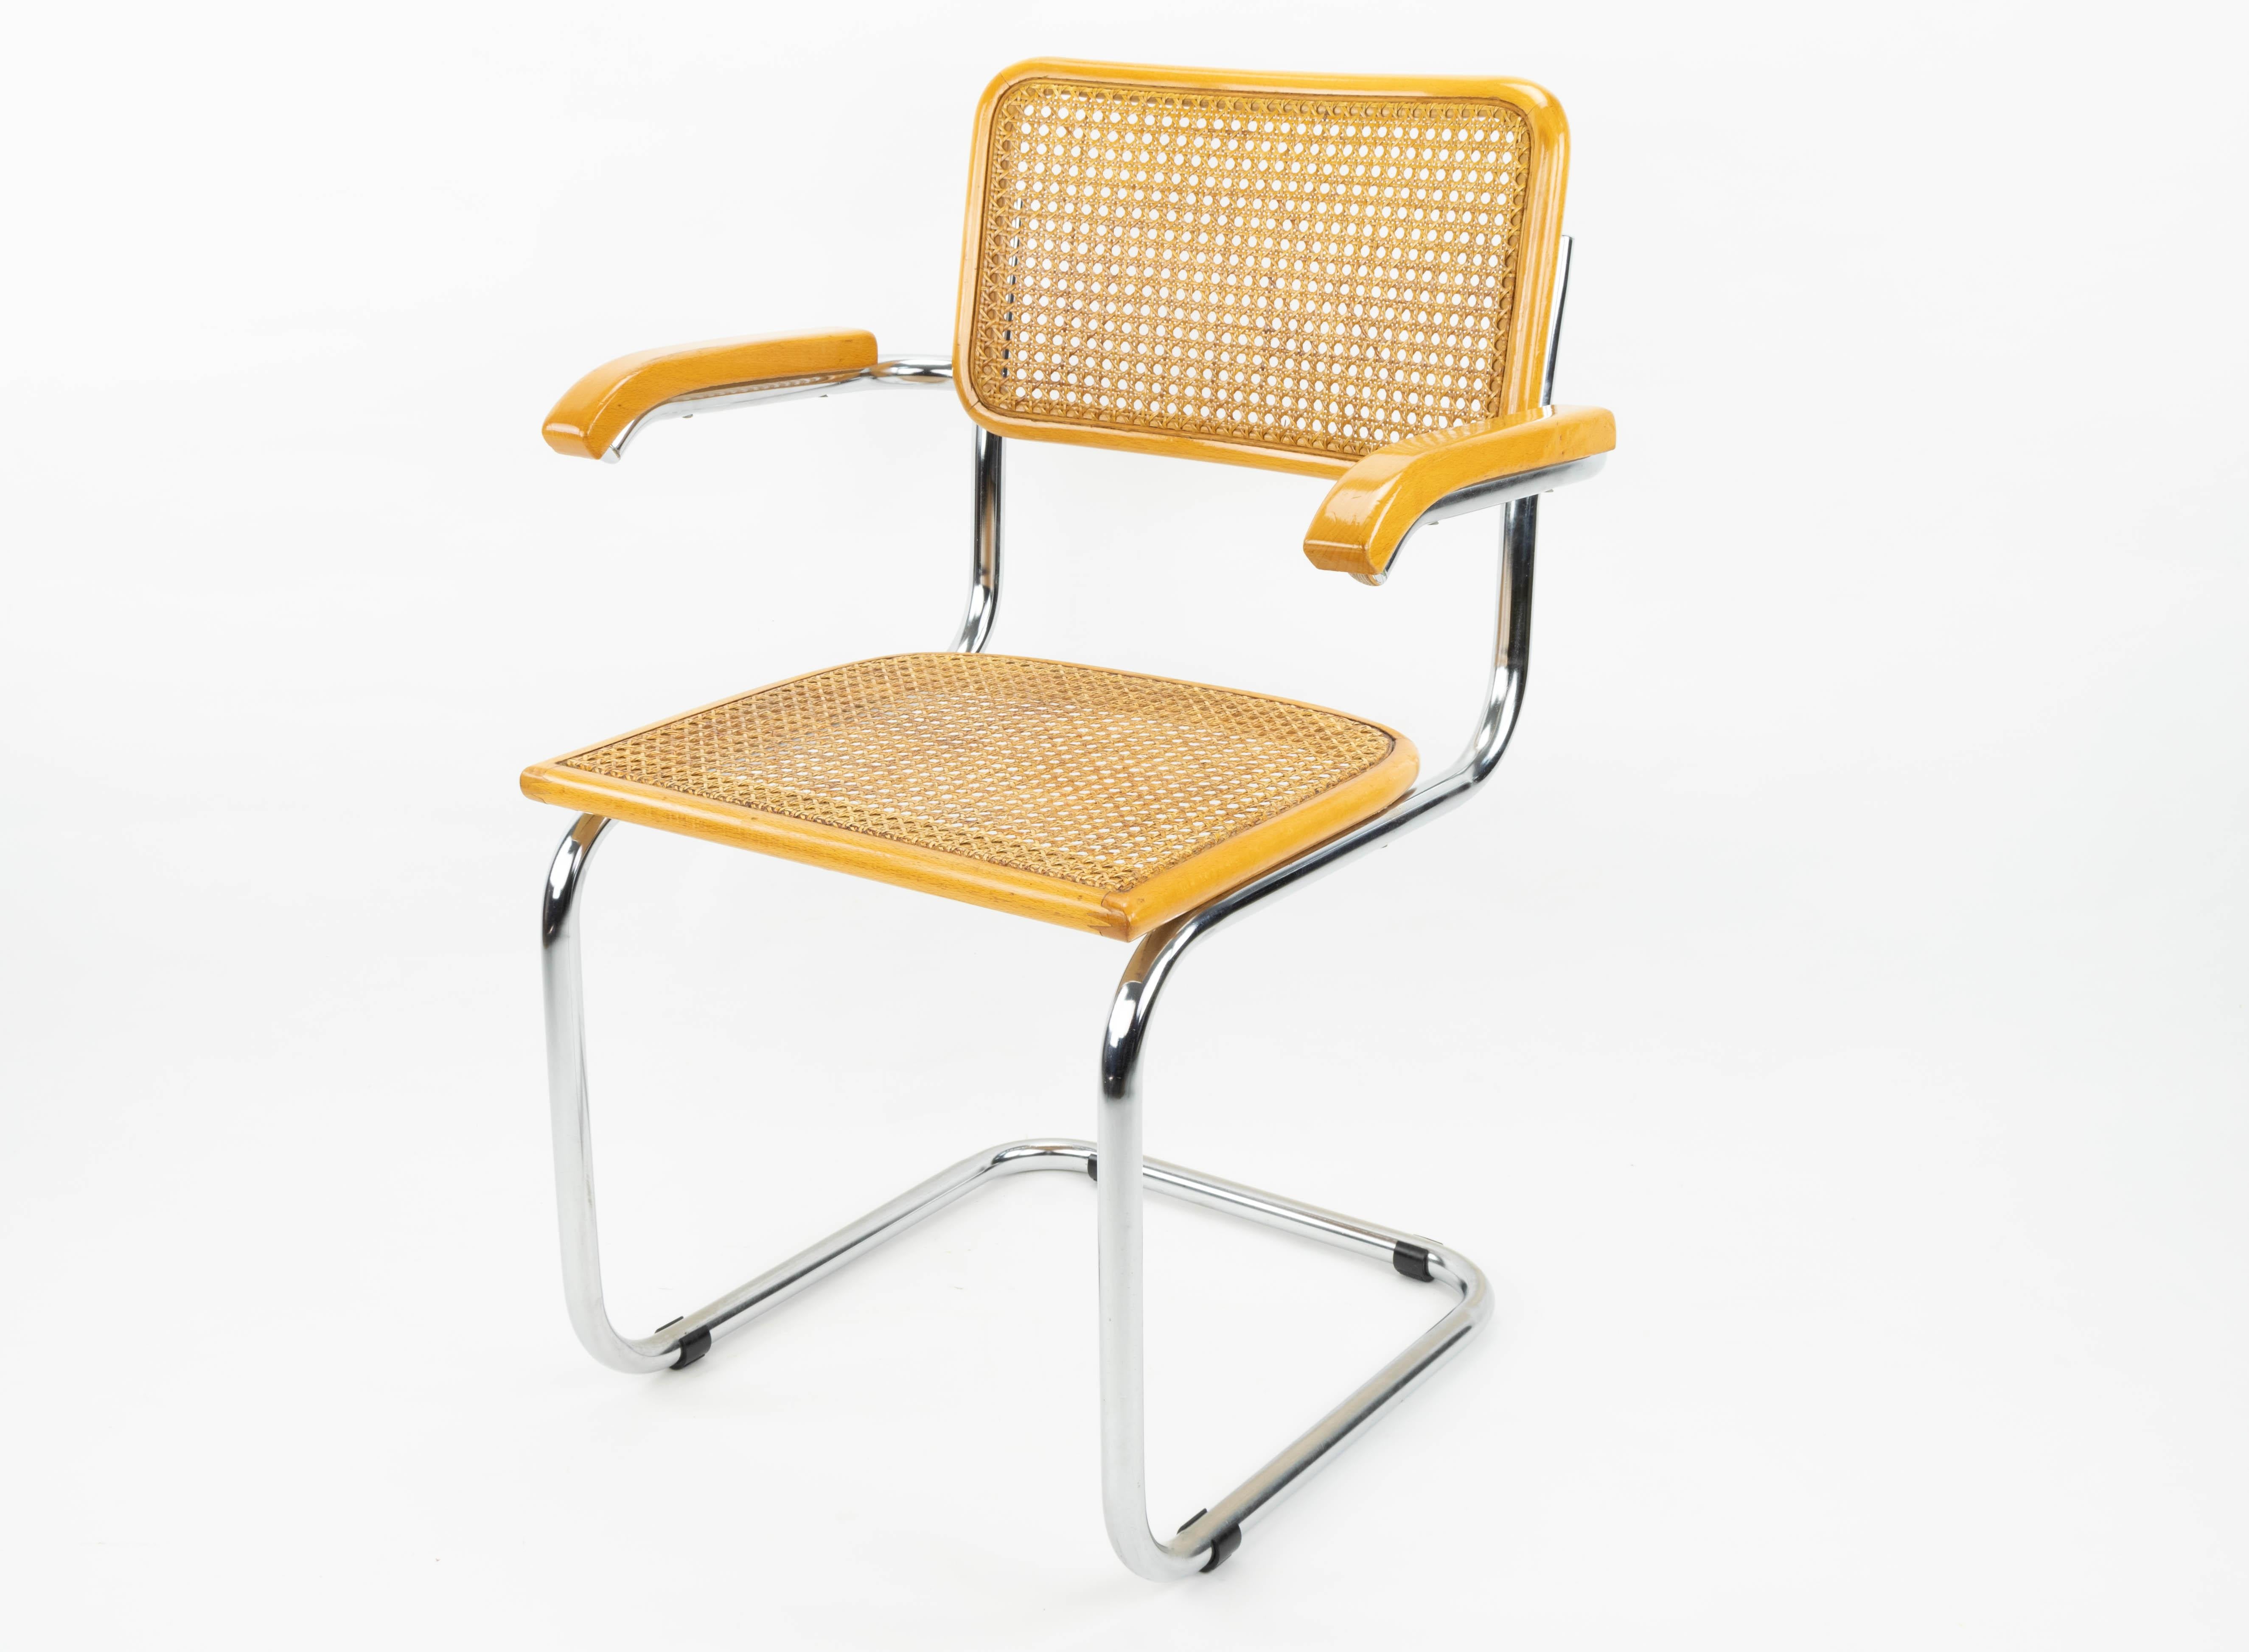 Mid-20th Century Mid-Century Modern Marcel Breuer Chrome and Golden Beech Cesca Chairs, Italy